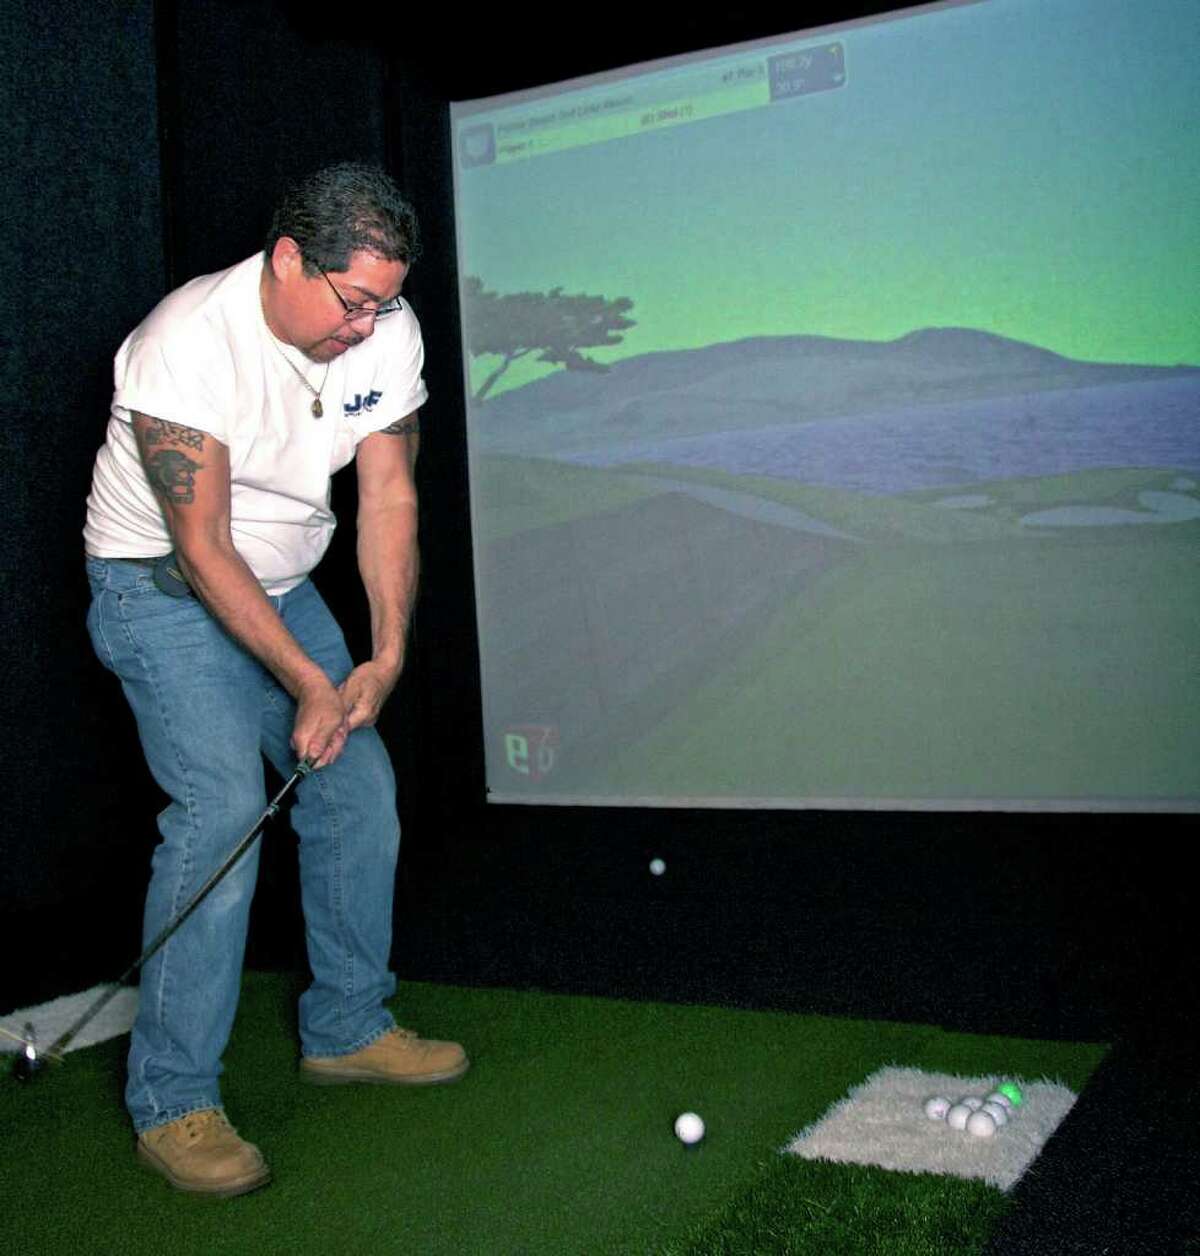 SPECTRUM/Joe Valedon from J & R Appliance Repair, who had never hit a golf ball in his life, takes his shot during the Greater New Milford Chamber of Commerce's 80th anniversary party at a simulated version of the famous 7th hole at Pebble Beach Golf Links in California on the "Golf Simulator" at Phys-Ed Health and Performance in New Milford. The golf simulator is among the attractions at the Still River business. May 20, 2011